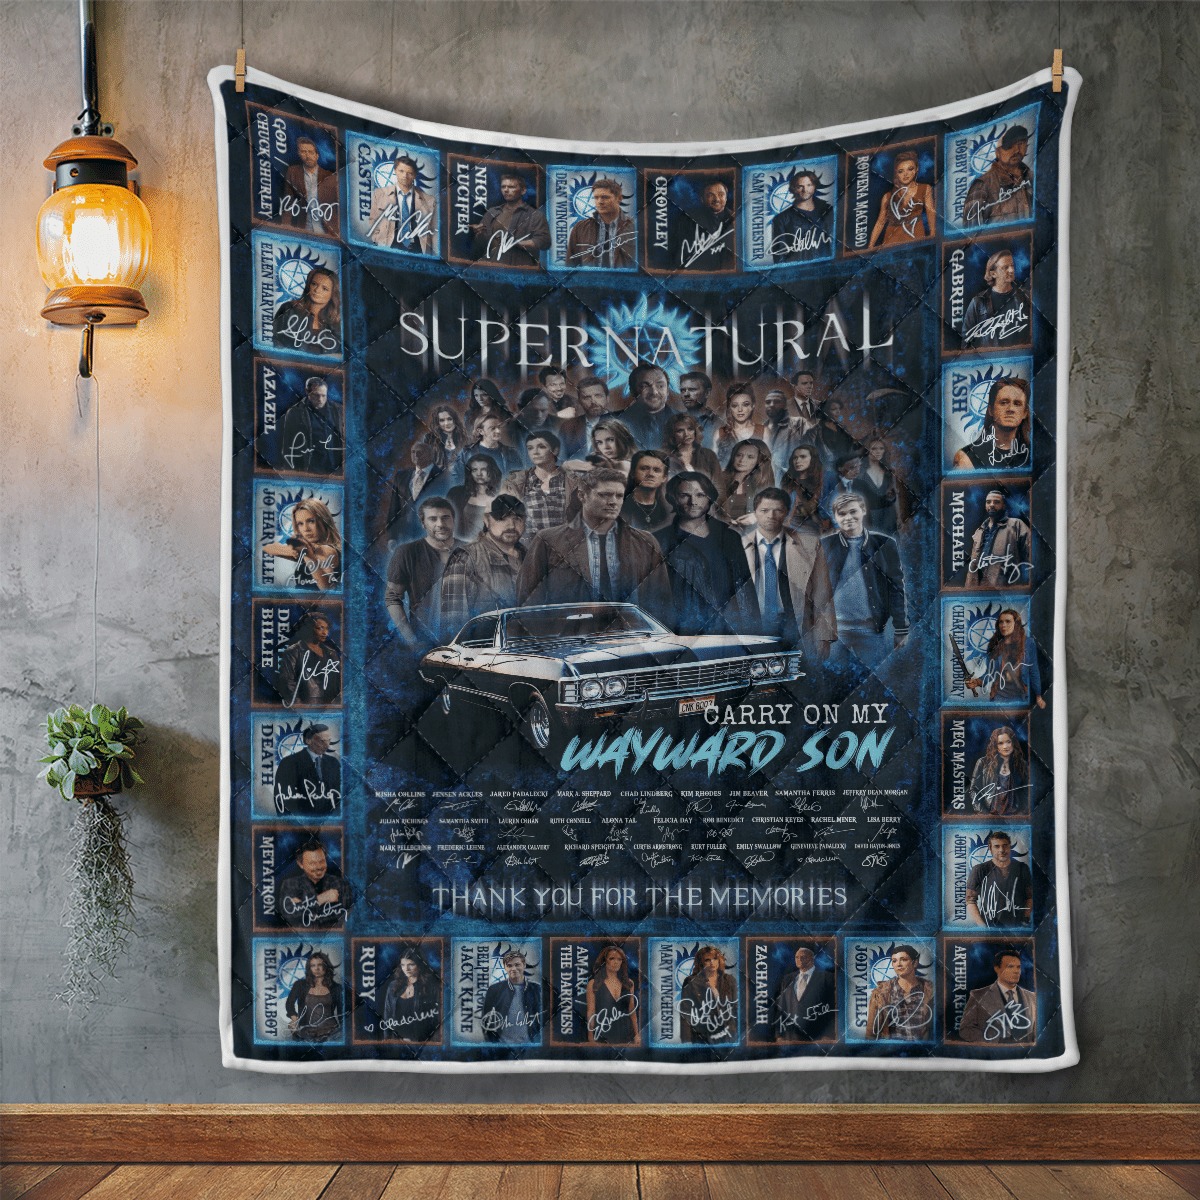 NEW Thank you for the memories Supernatural quilt 1